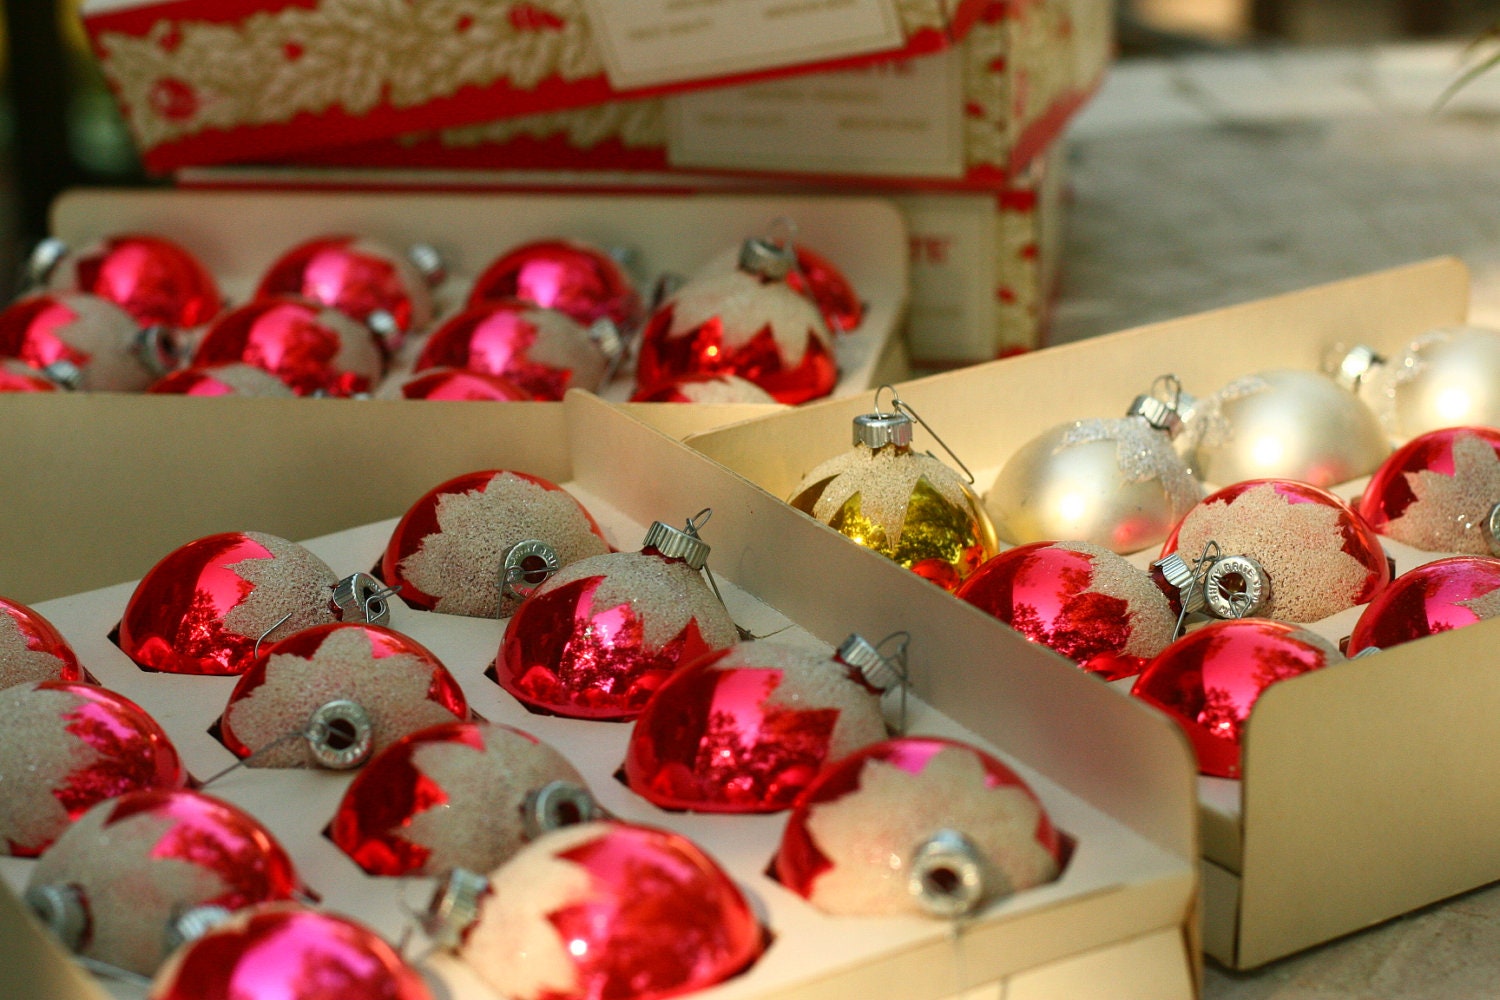 36 Shiny Brite Ornaments, 30 red bulbs, 1 gold bulb, 5 silver bulbs, Snow Topped Christmas Bulbs,Tree Trimming - vintageatmosphere